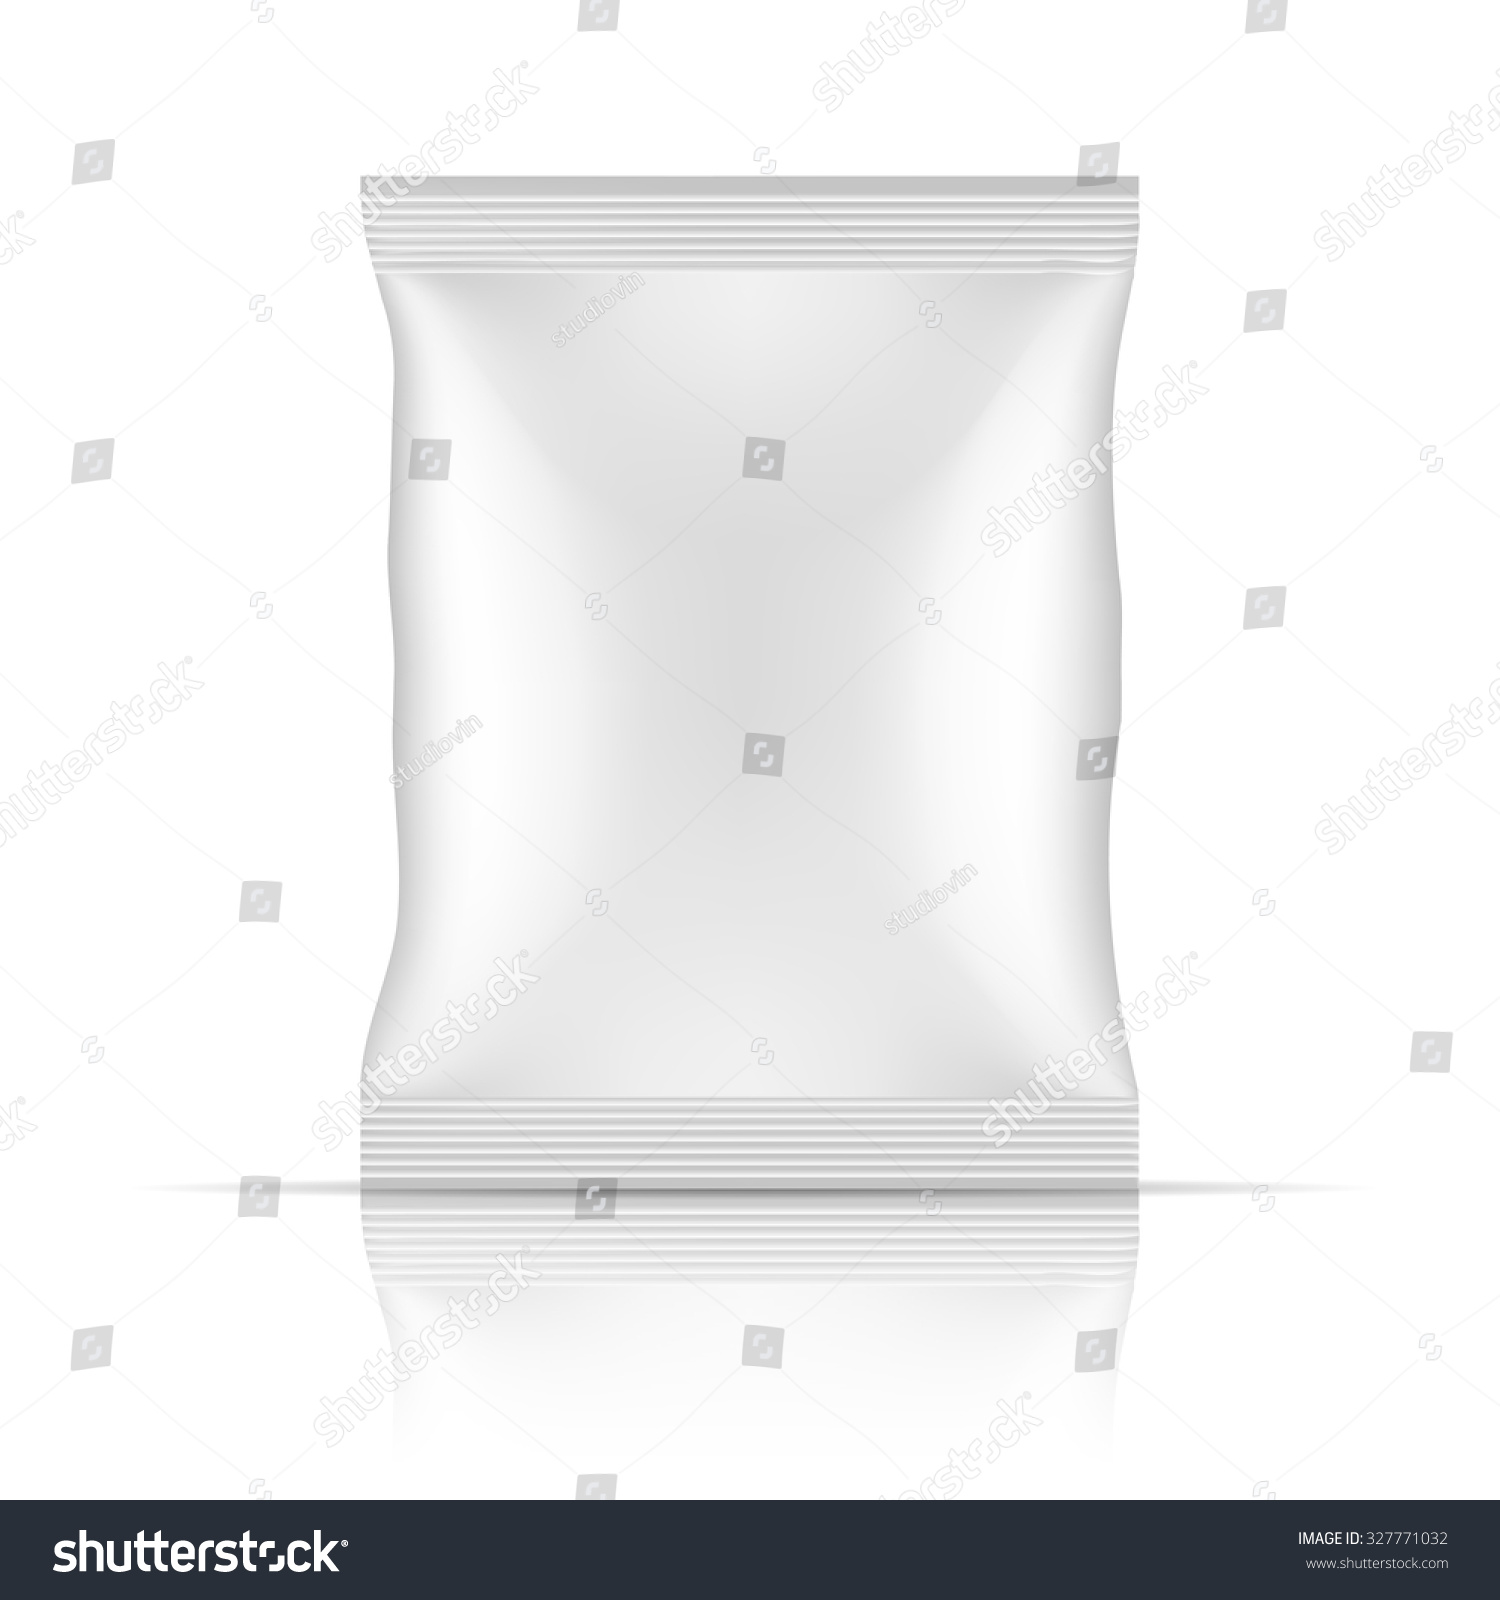 White Blank Foil Chips, Cookies. #327771032